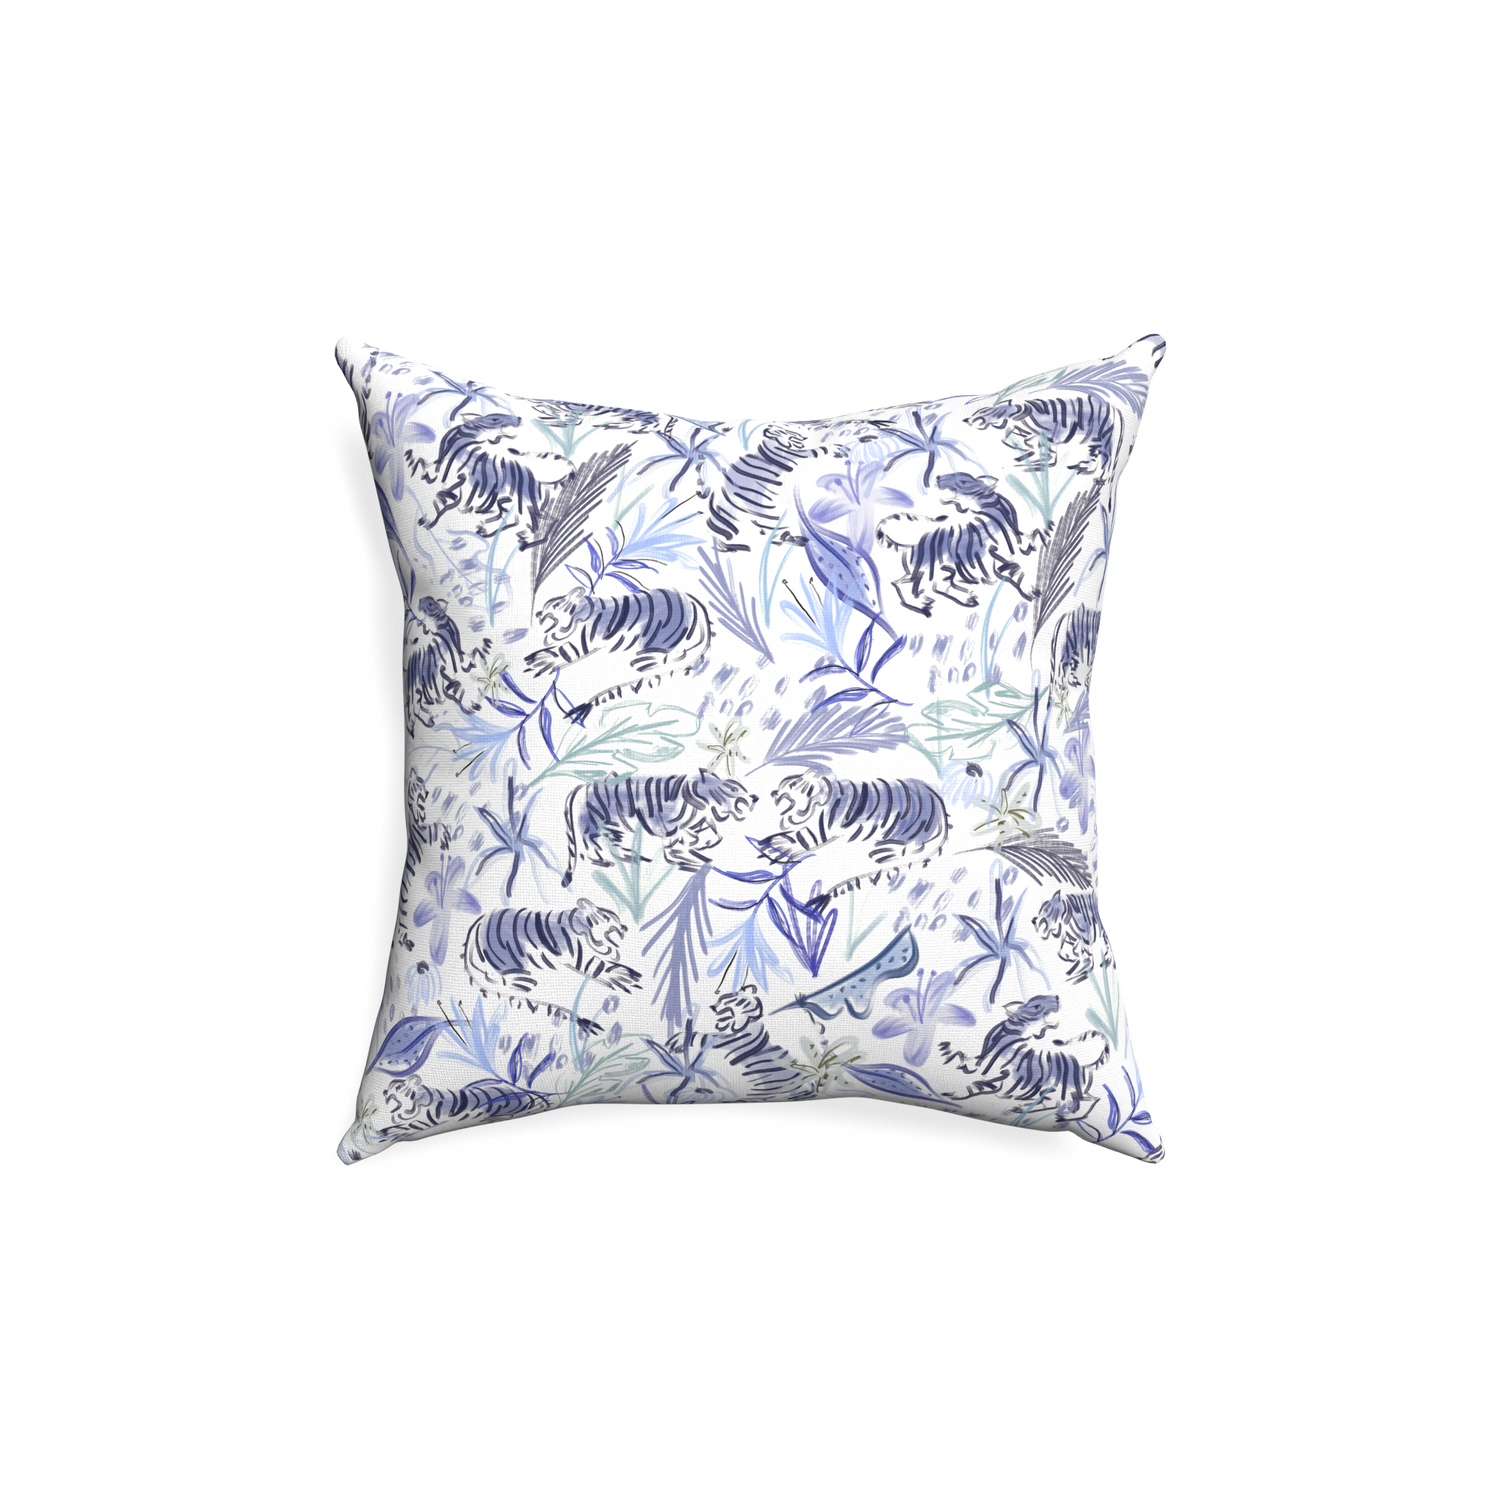 18-square frida blue custom blue with intricate tiger designpillow with none on white background